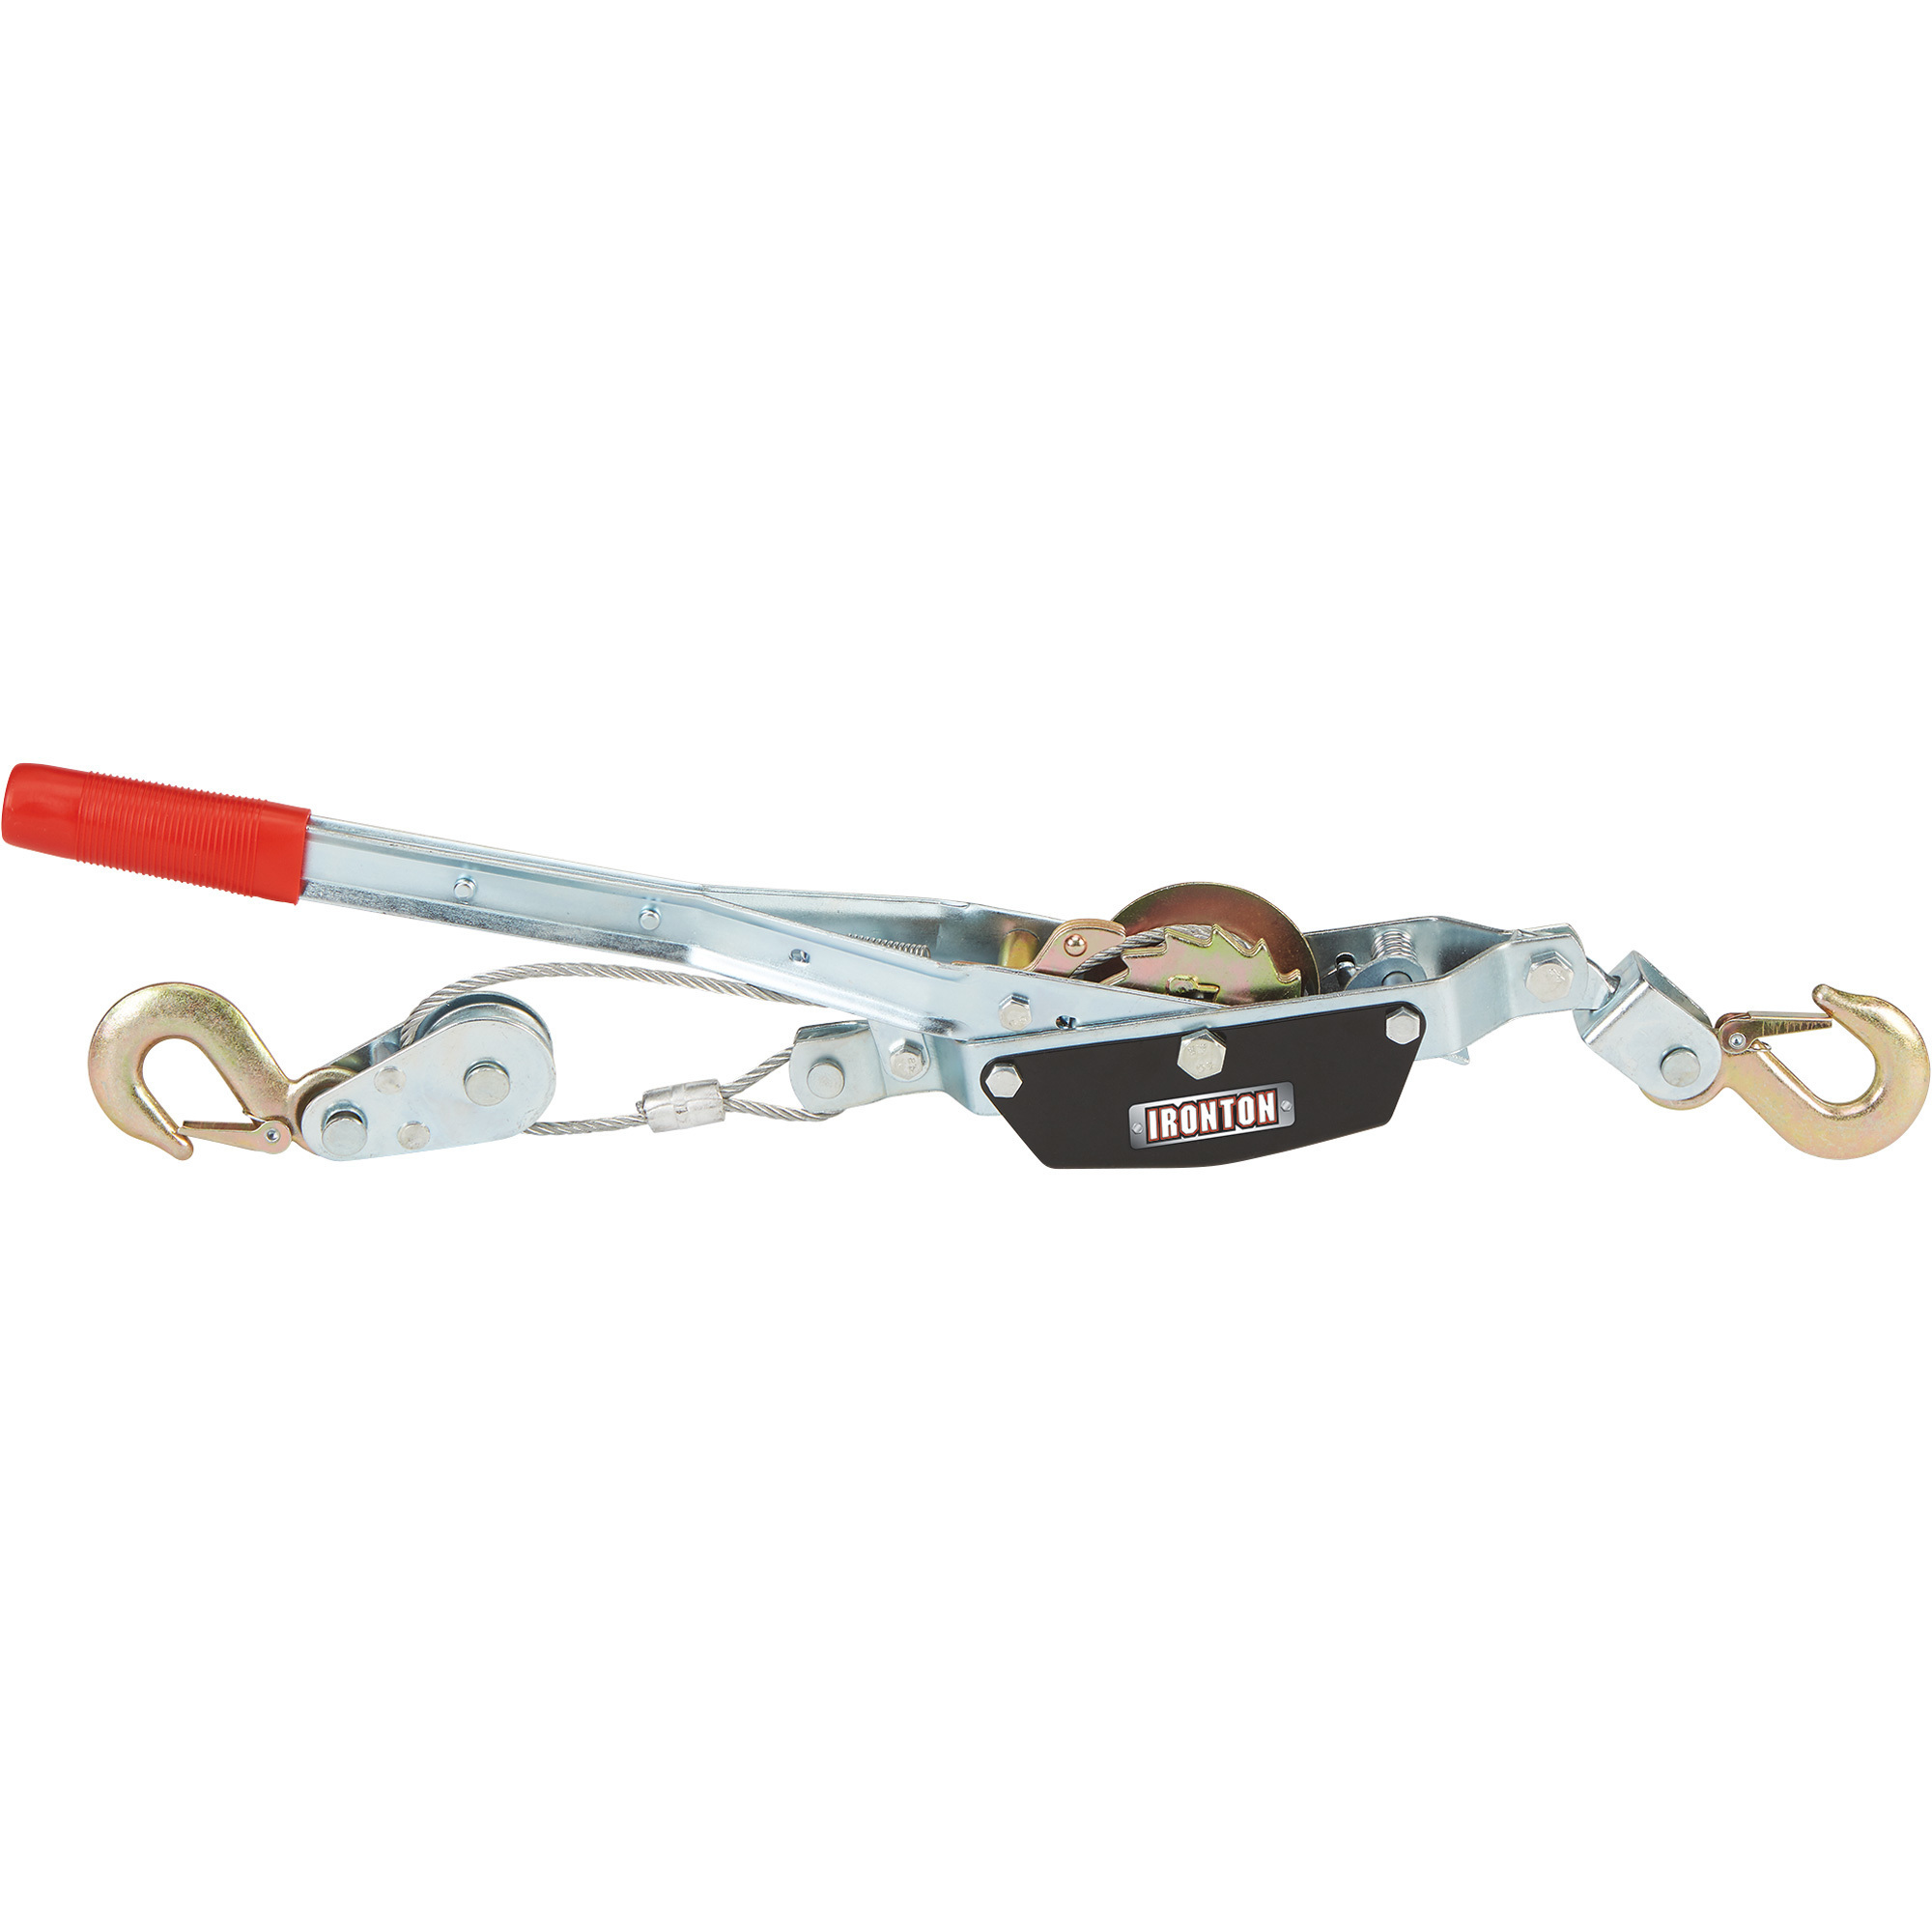 Ironton 2-Ton Hand Cable Puller, Double Line Load Capacity 4400lb., 5.9ft. Cable Length